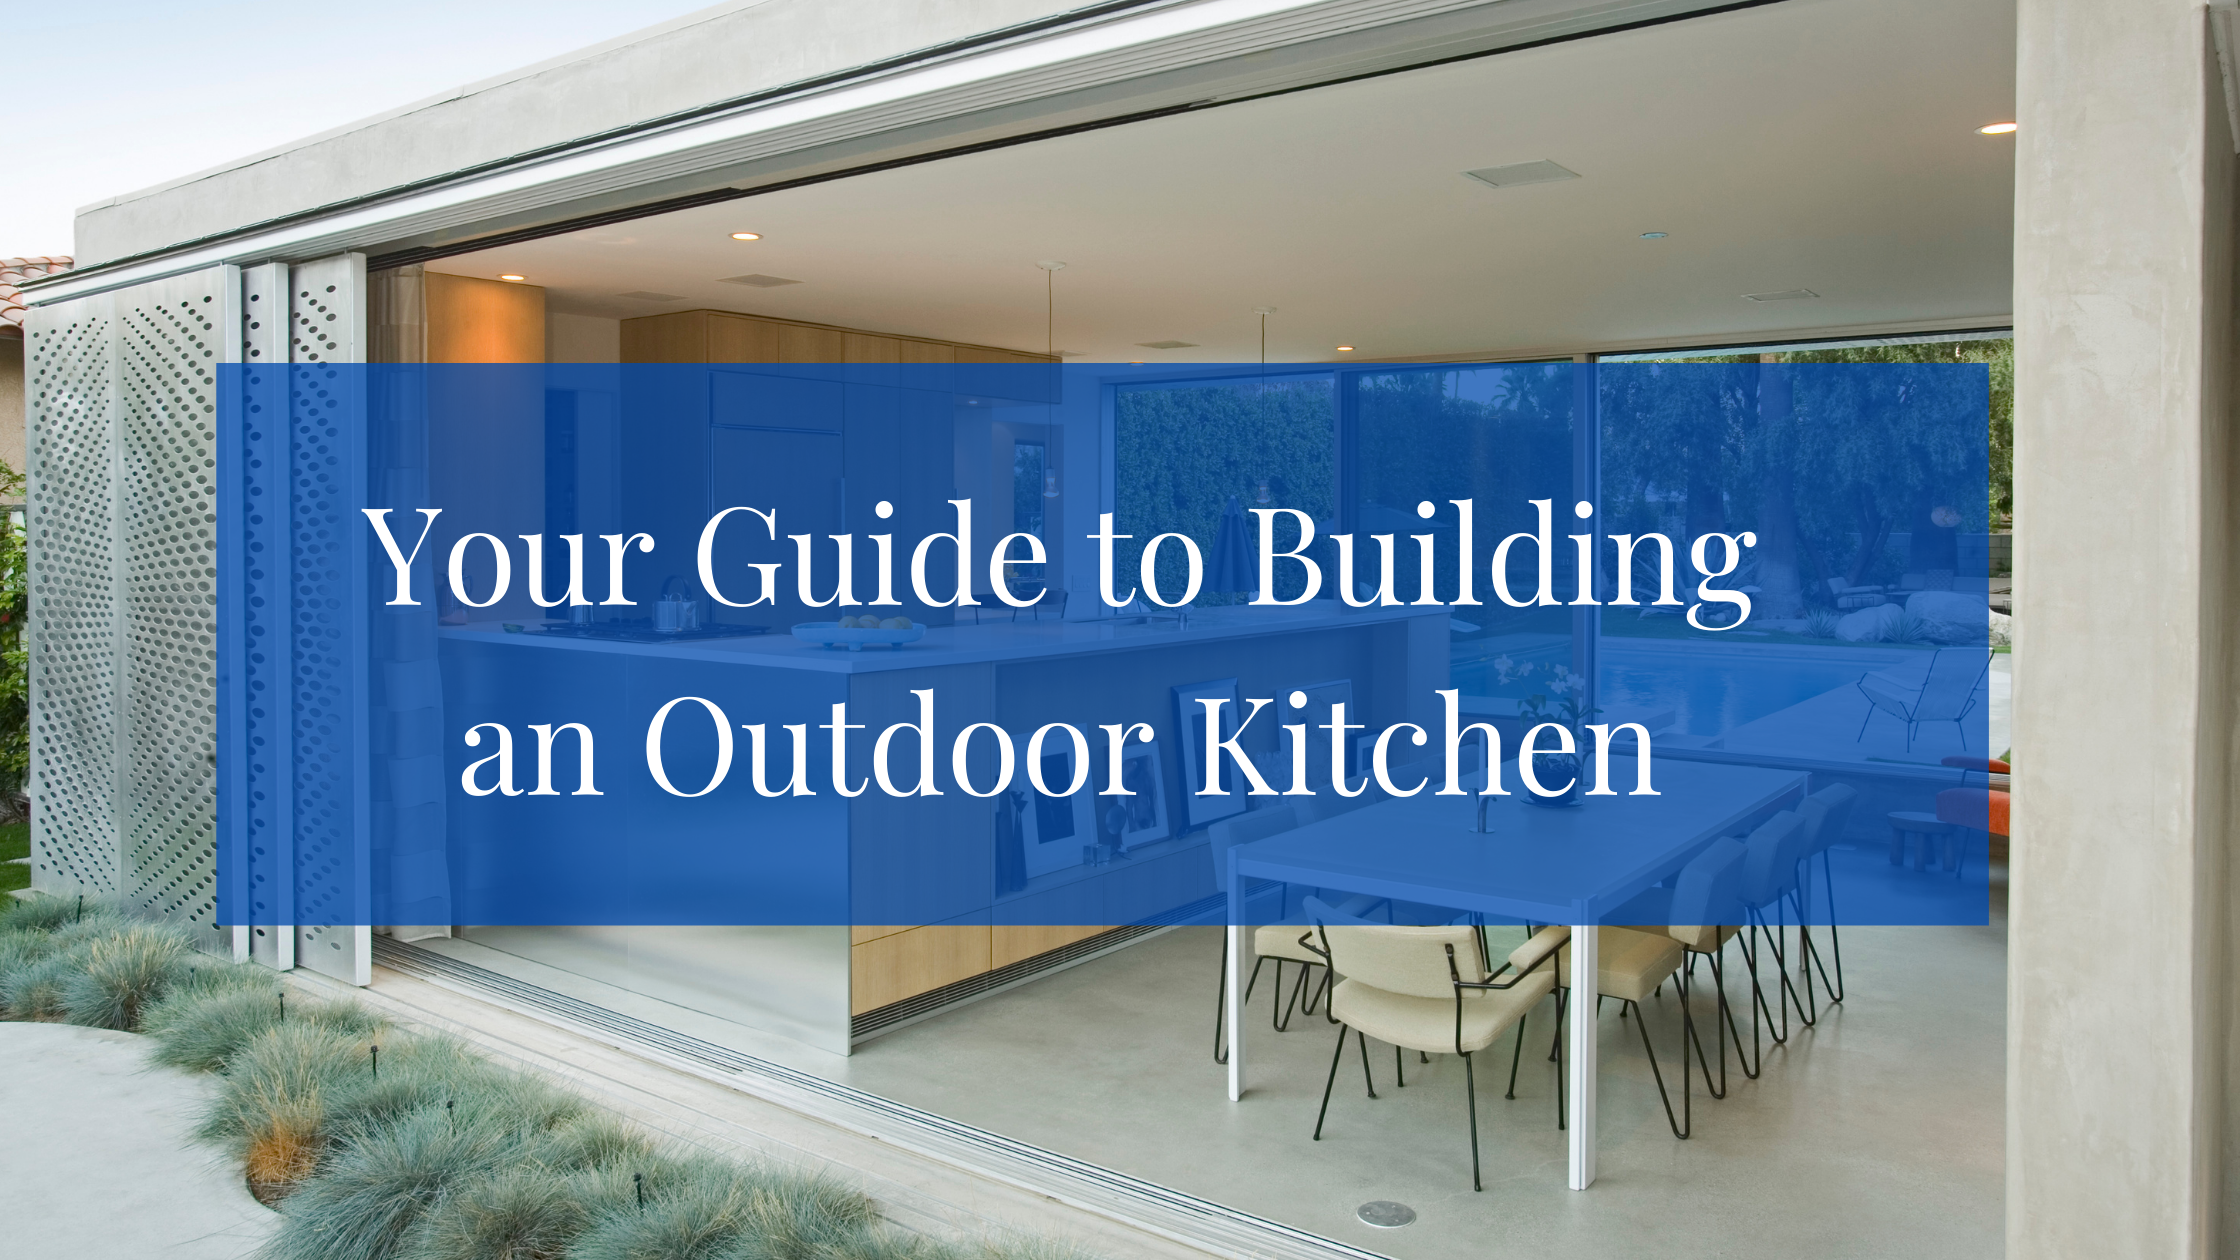 https://handymanconnection.com/wp-content/uploads/2021/05/Your-Guide-to-Building-an-Outdoor-Kitchen.png